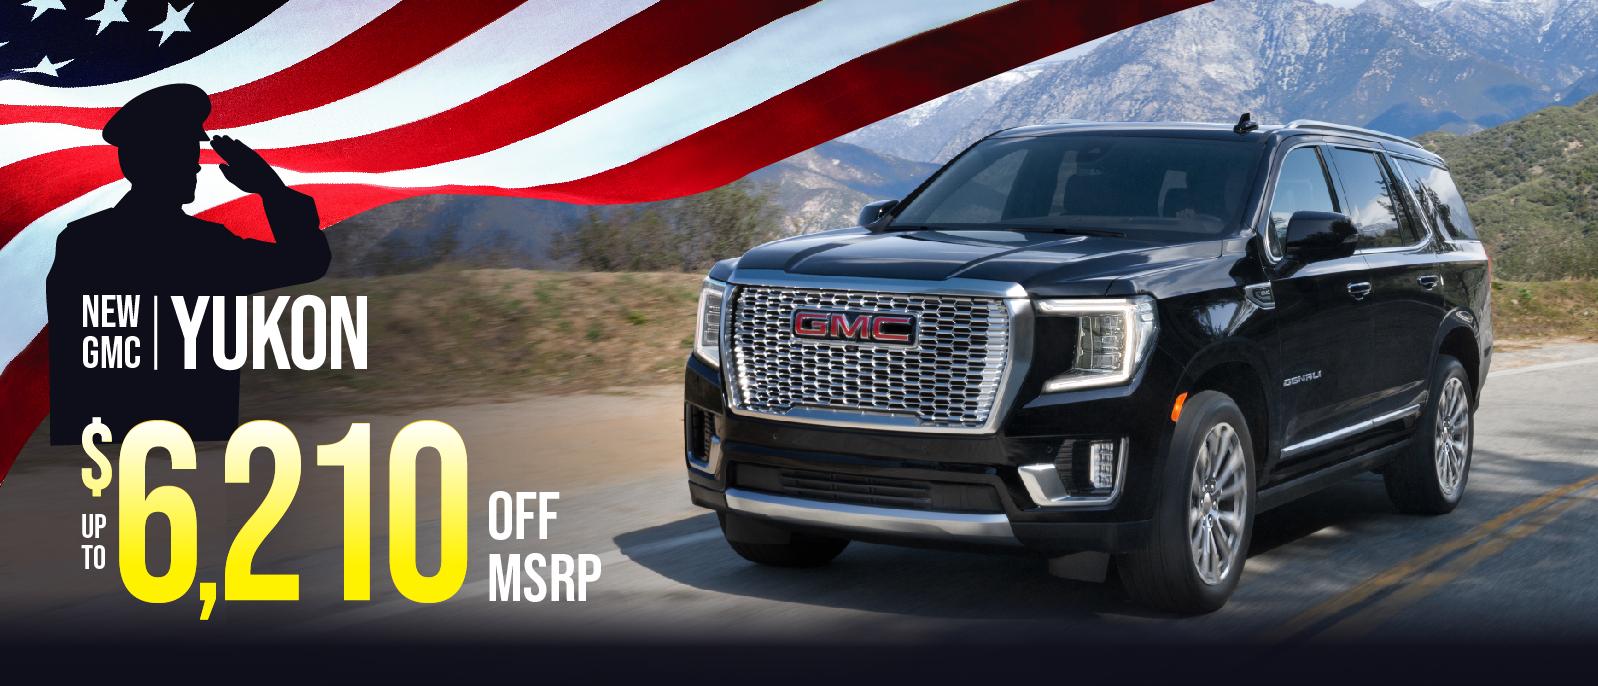 New GMC Yukon - up to $6210 OFF MSRP